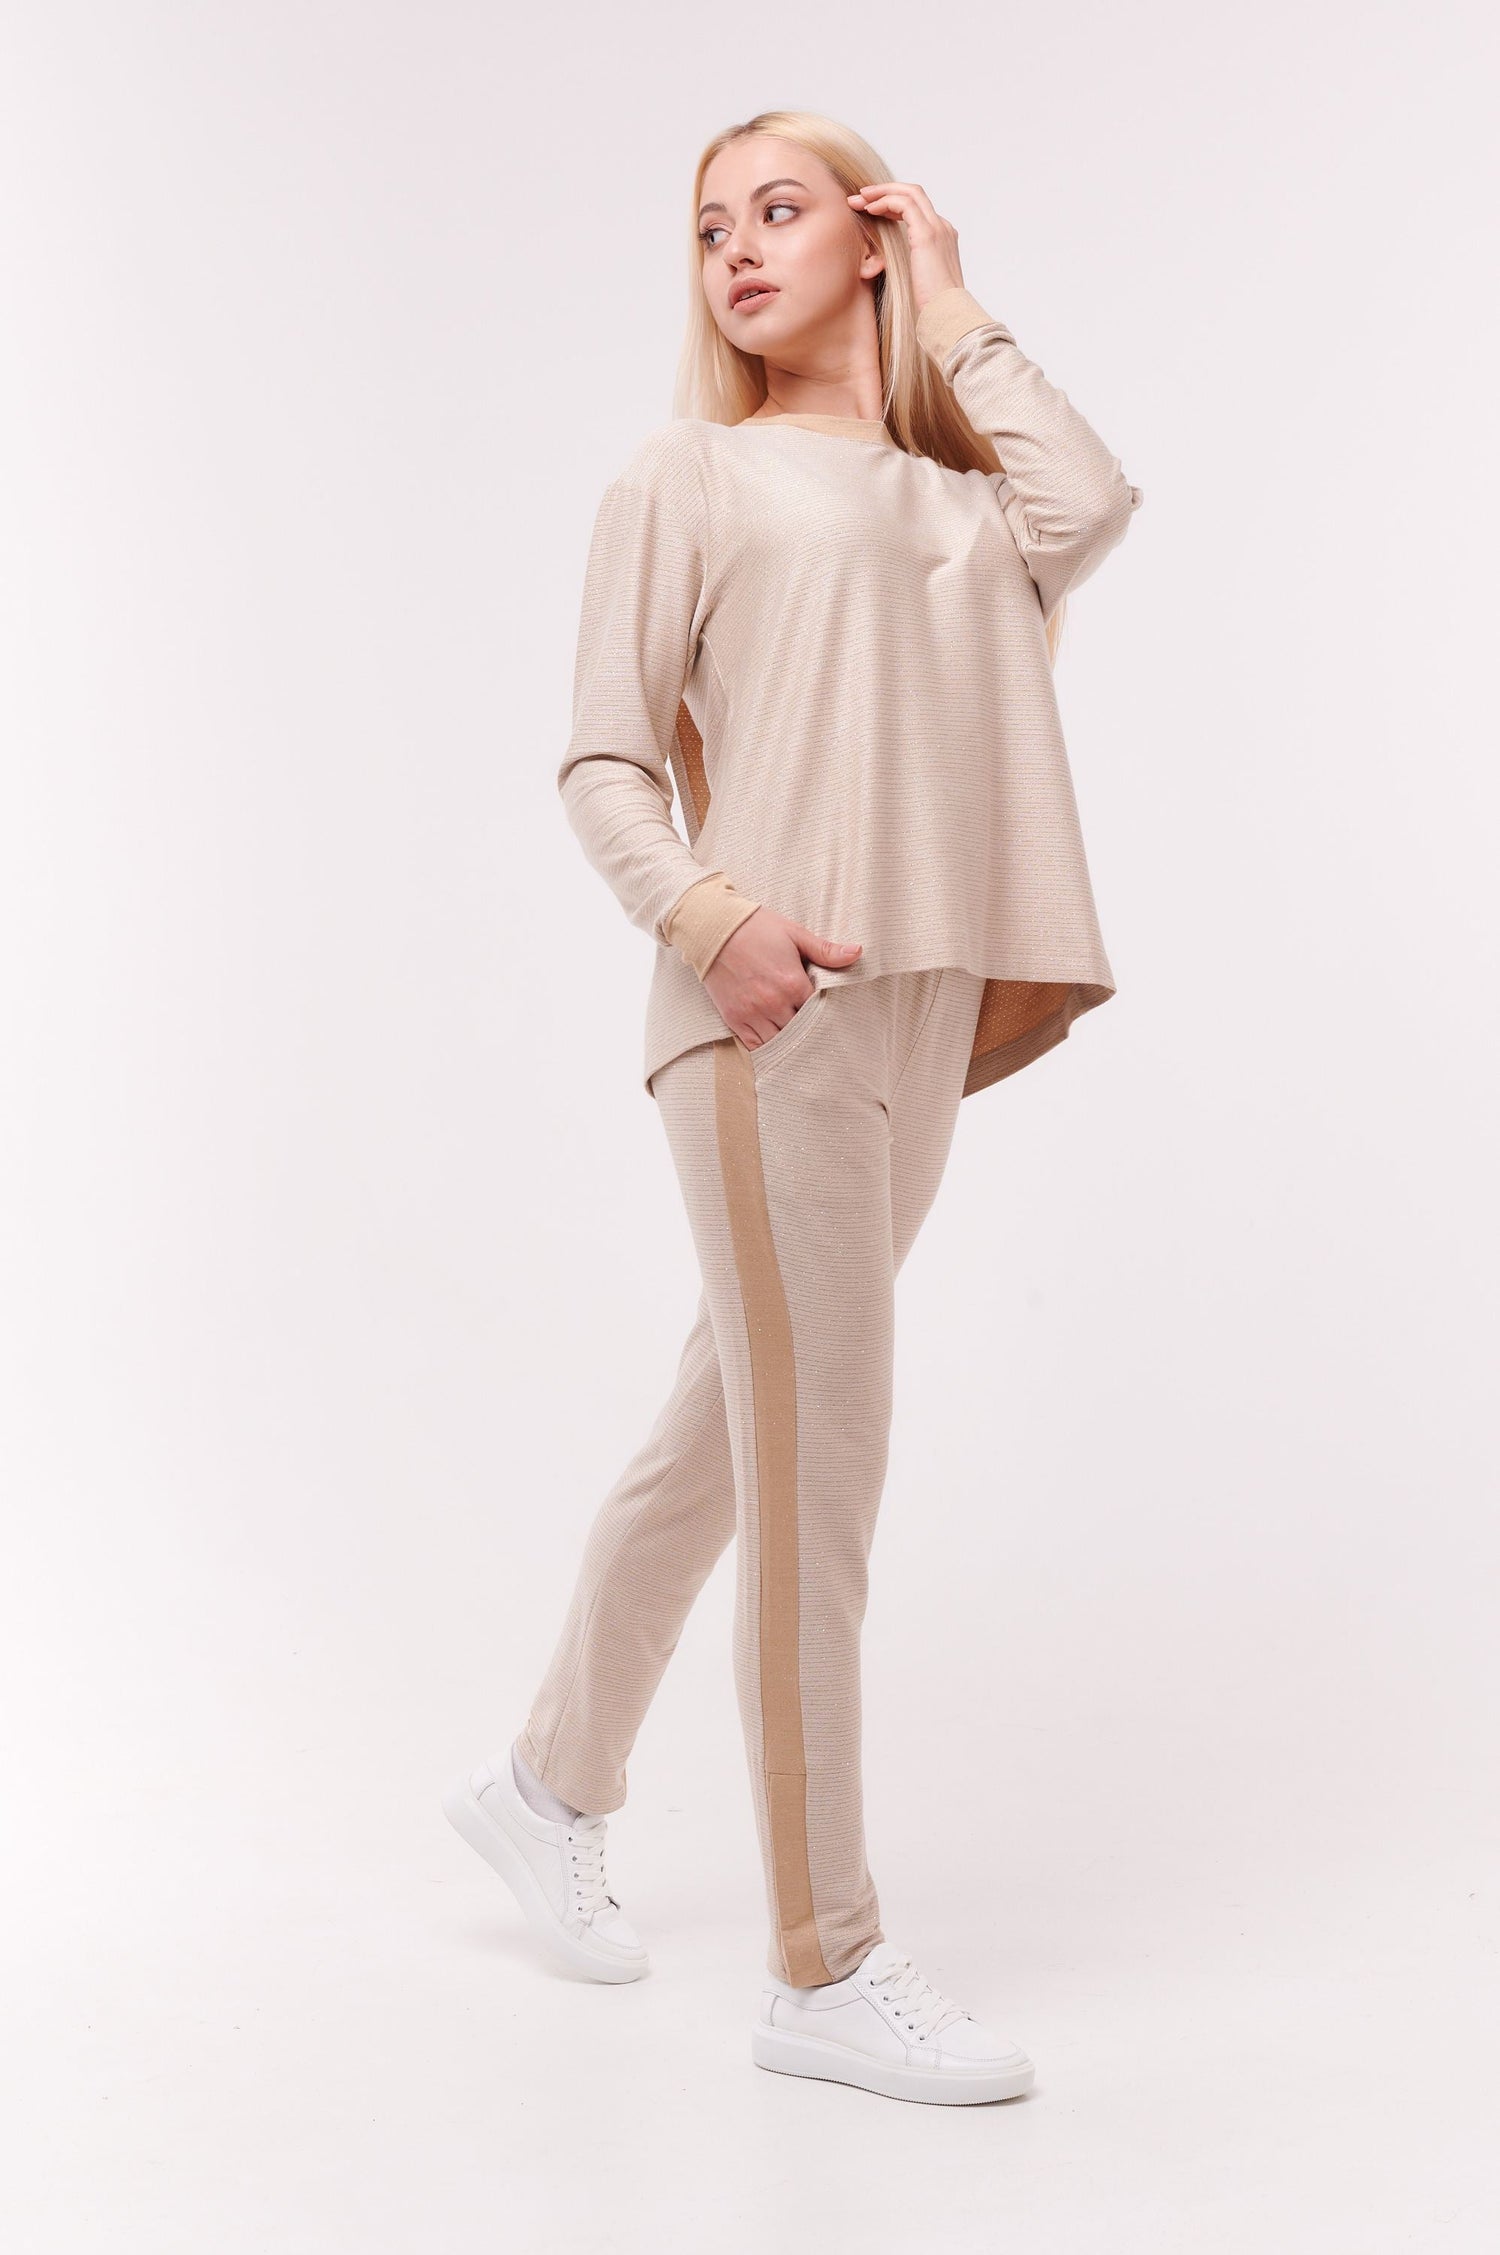 Woman posing wearing cream long sleeve top with back overlap and matching bottoms.